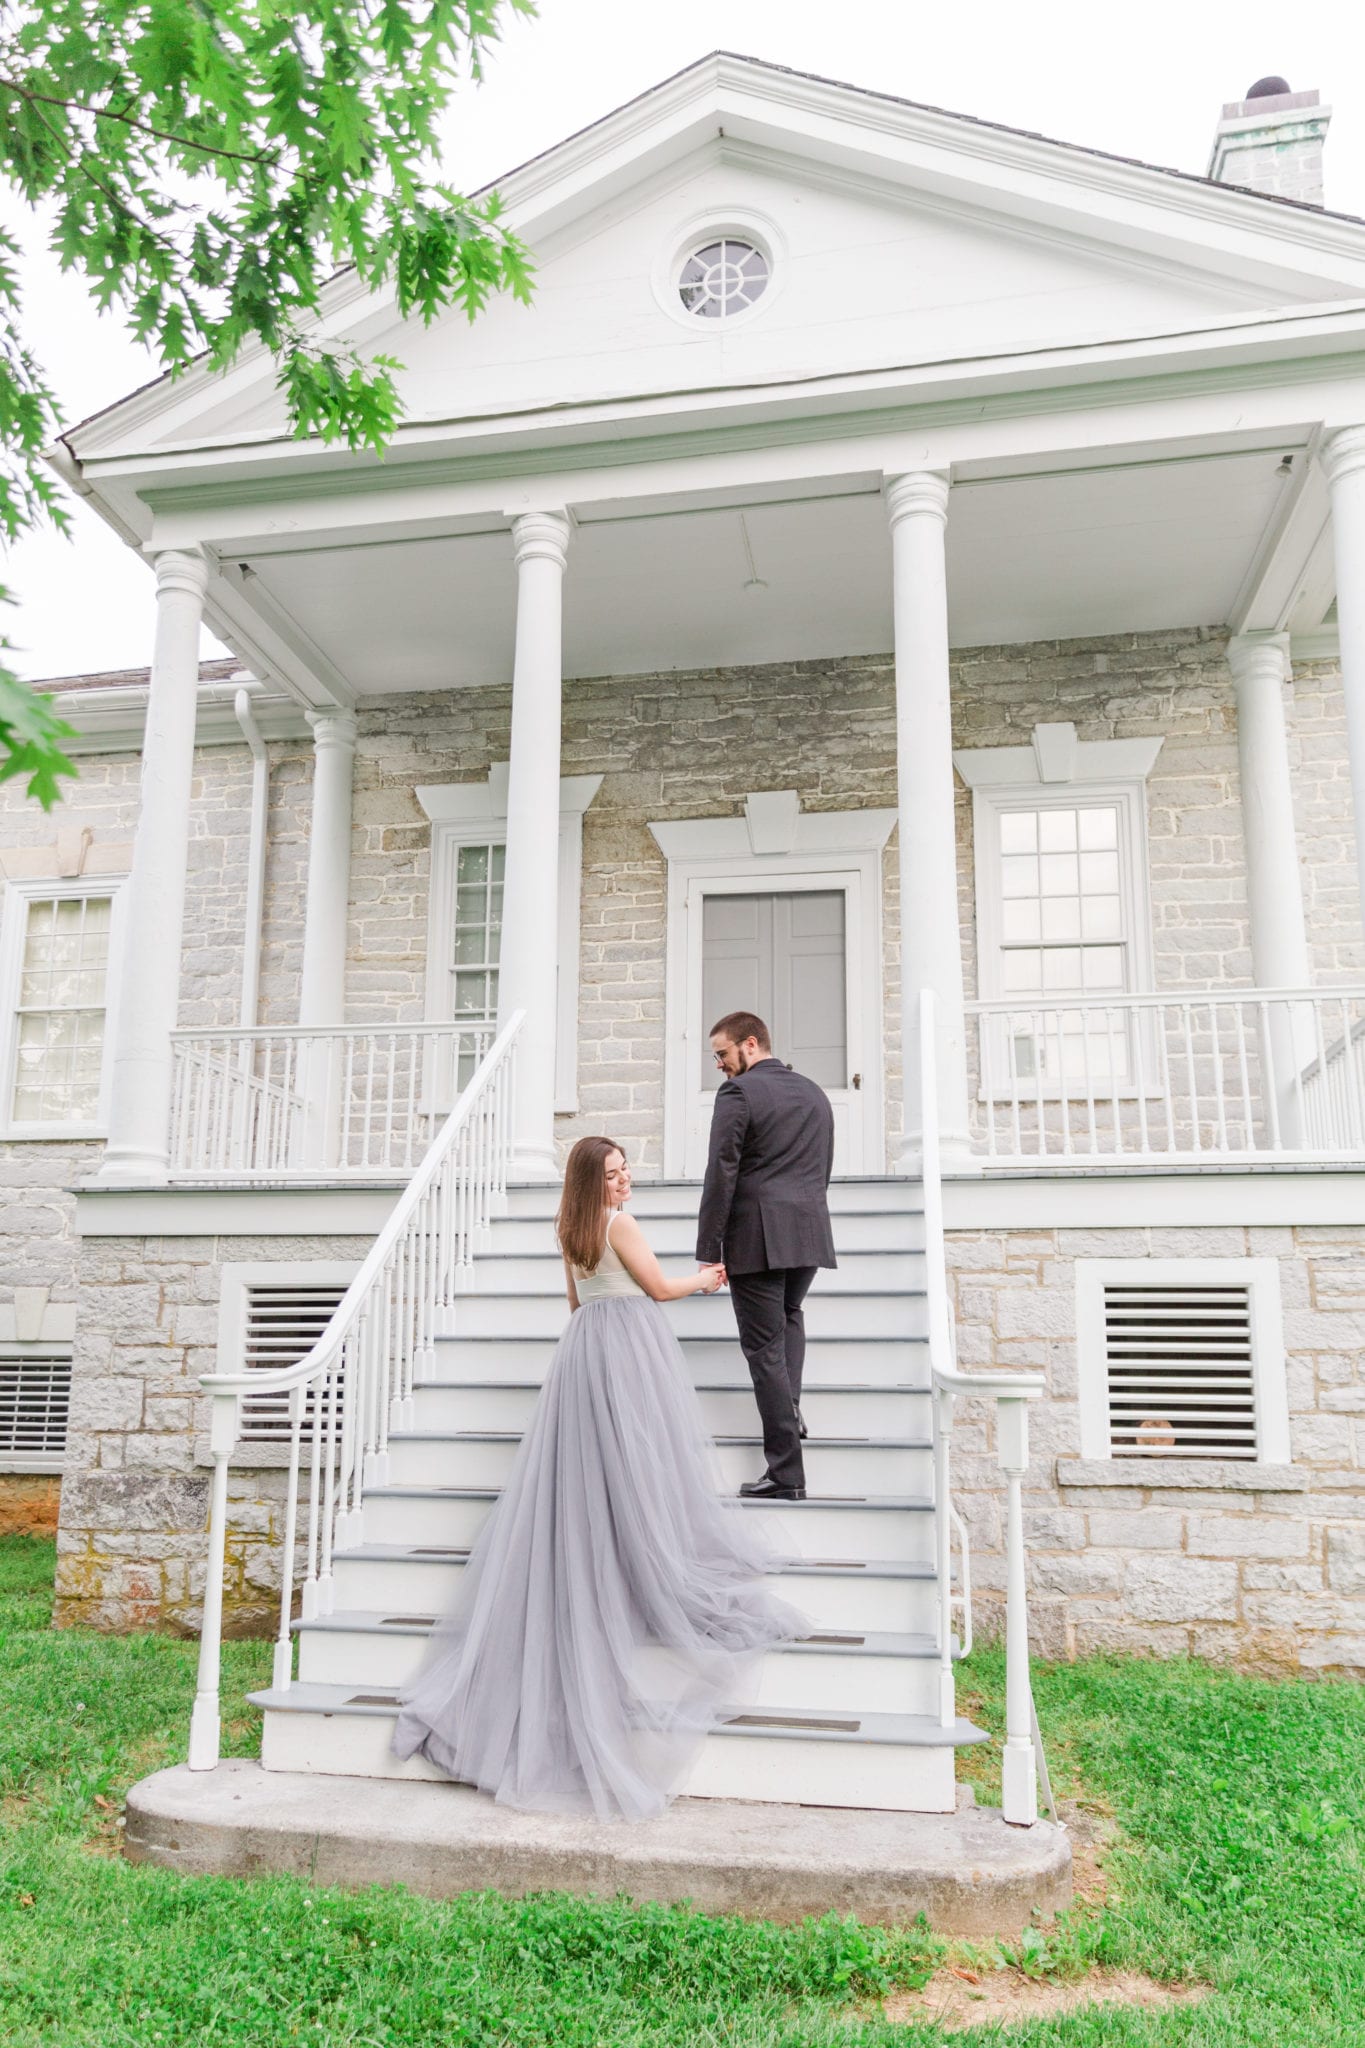 engagement session at belle grove plantation in the northern Shenandoah Valley near Middletown, Virginia